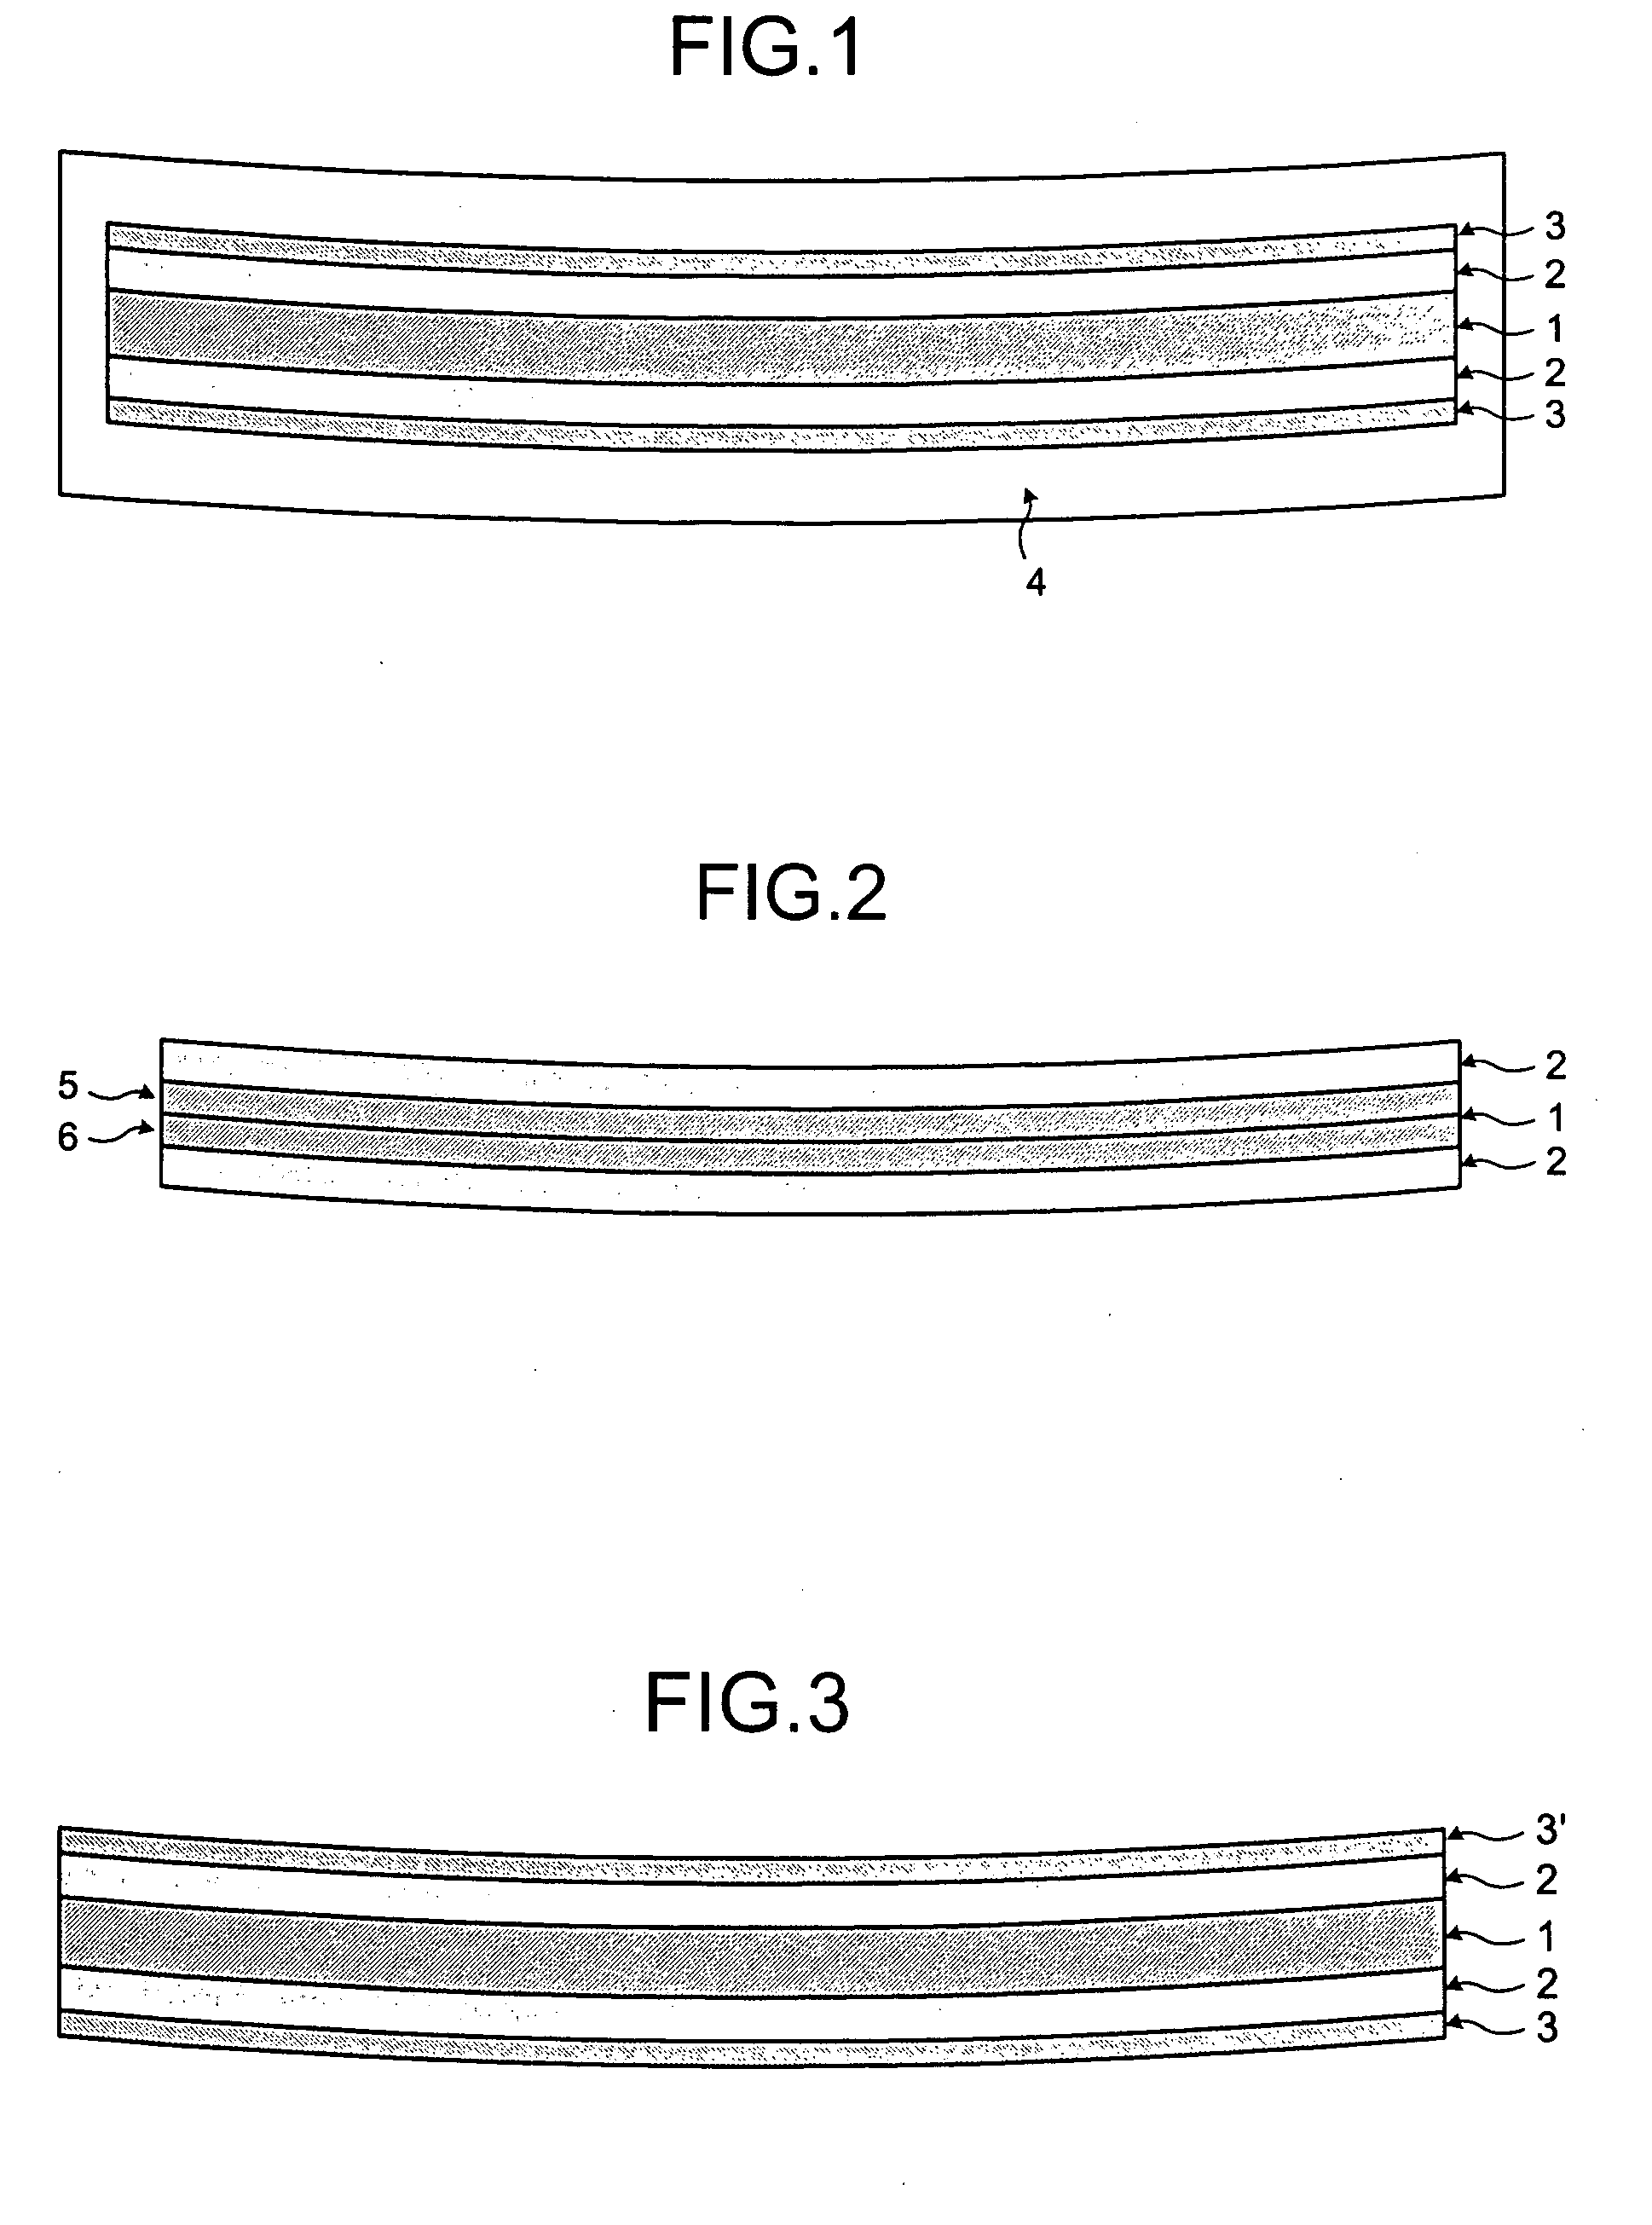 Light control plastic lens, coated sheet-like light control element for the lens production, and a production method for light control plastic lens